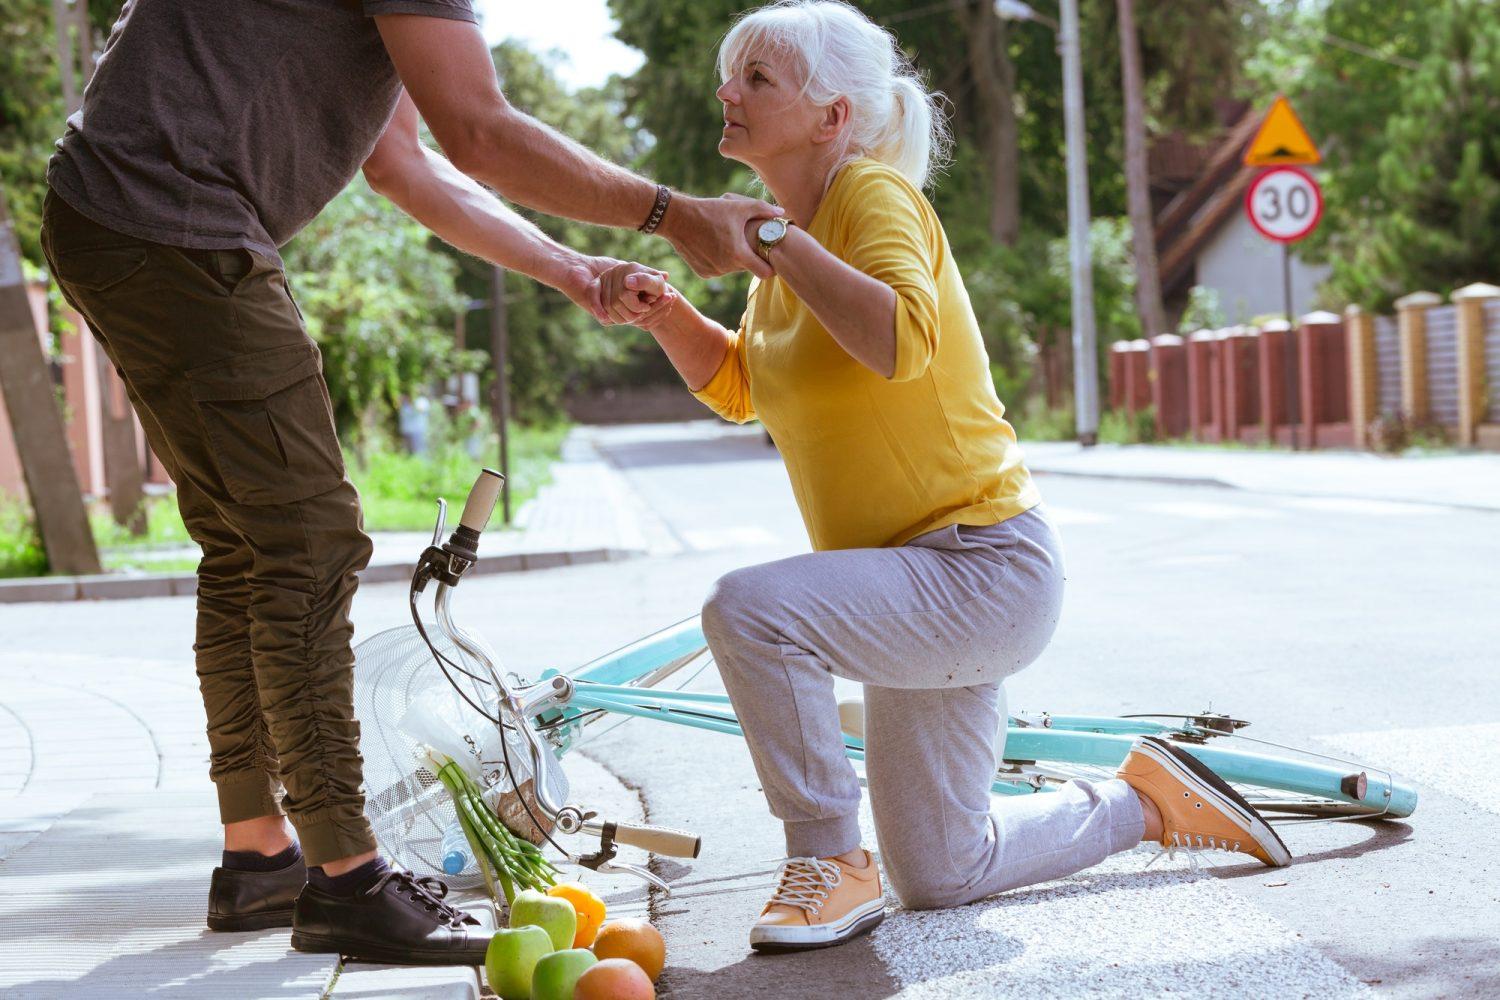 Handsome man helps an elderly woman get up after falling off a bicycle on a suburban road